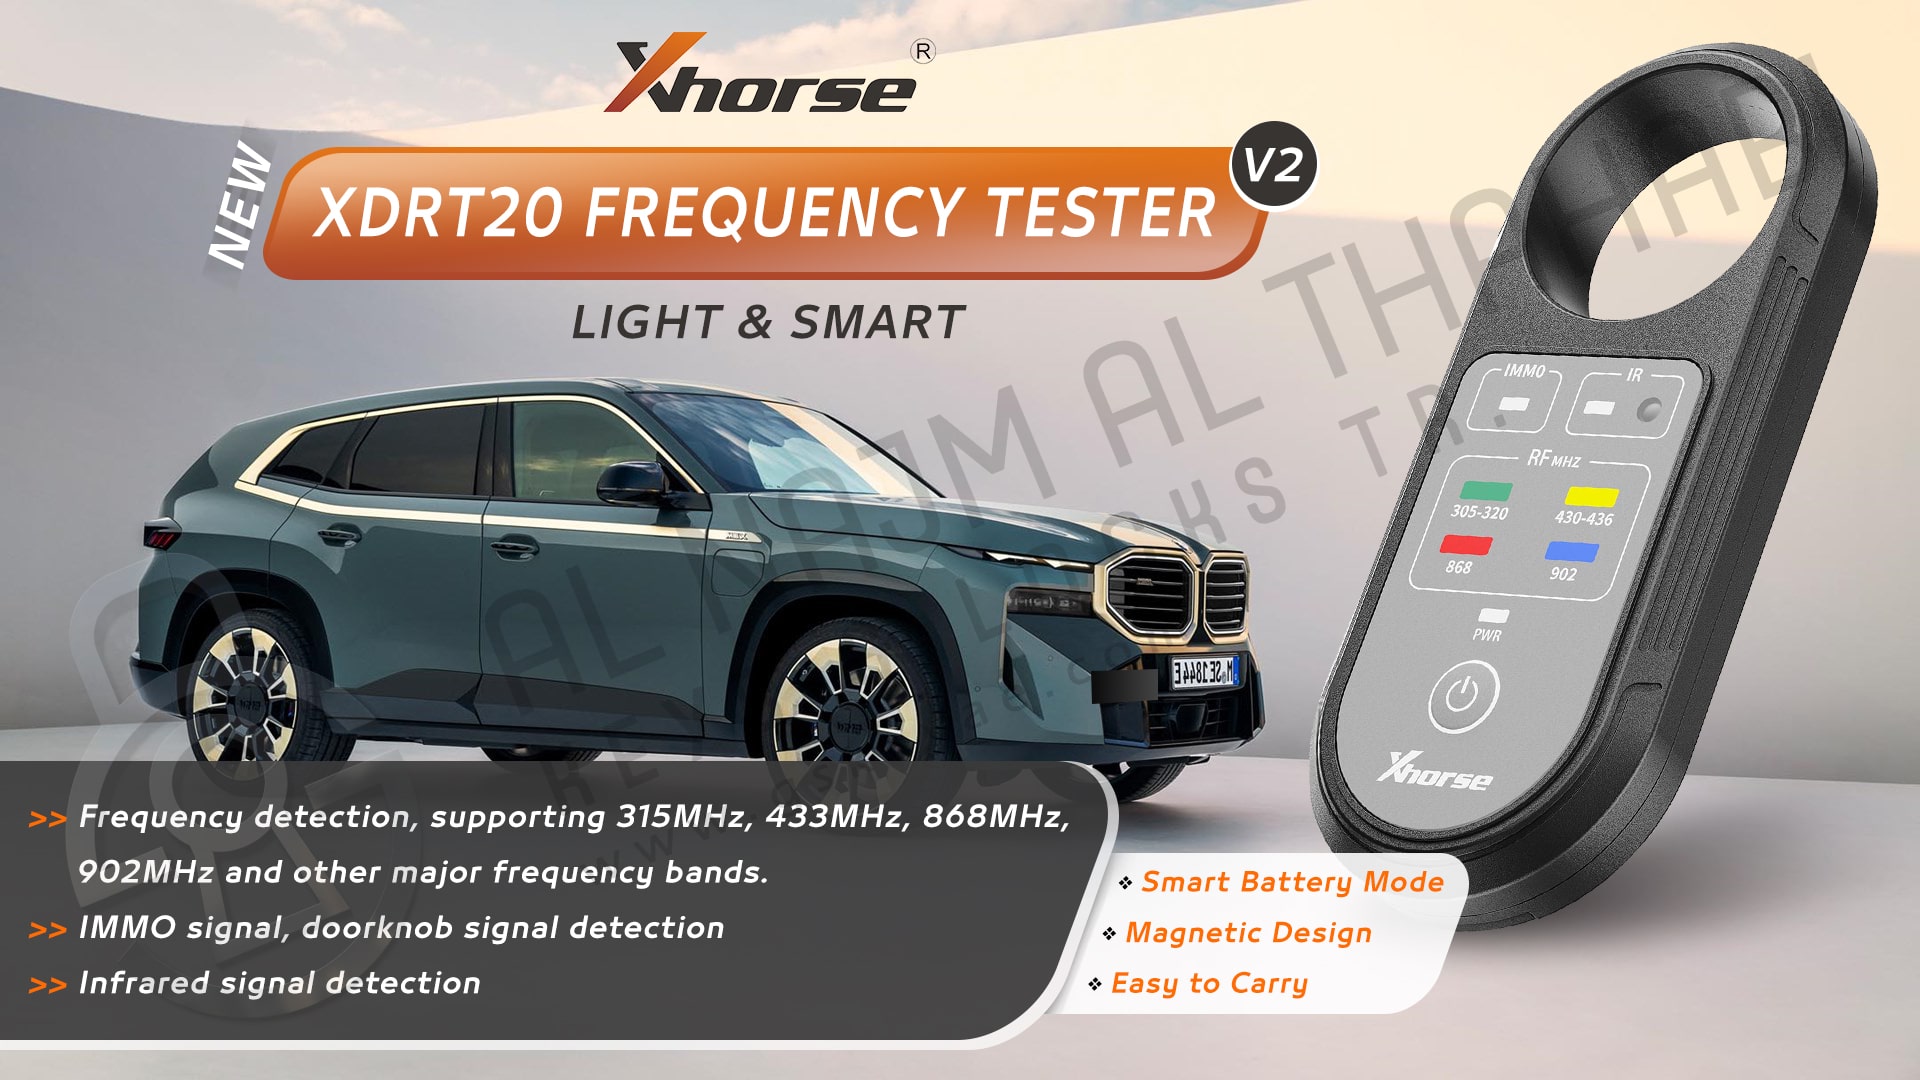 Xhorse XDRT20 Frequency Tester V2 Functions